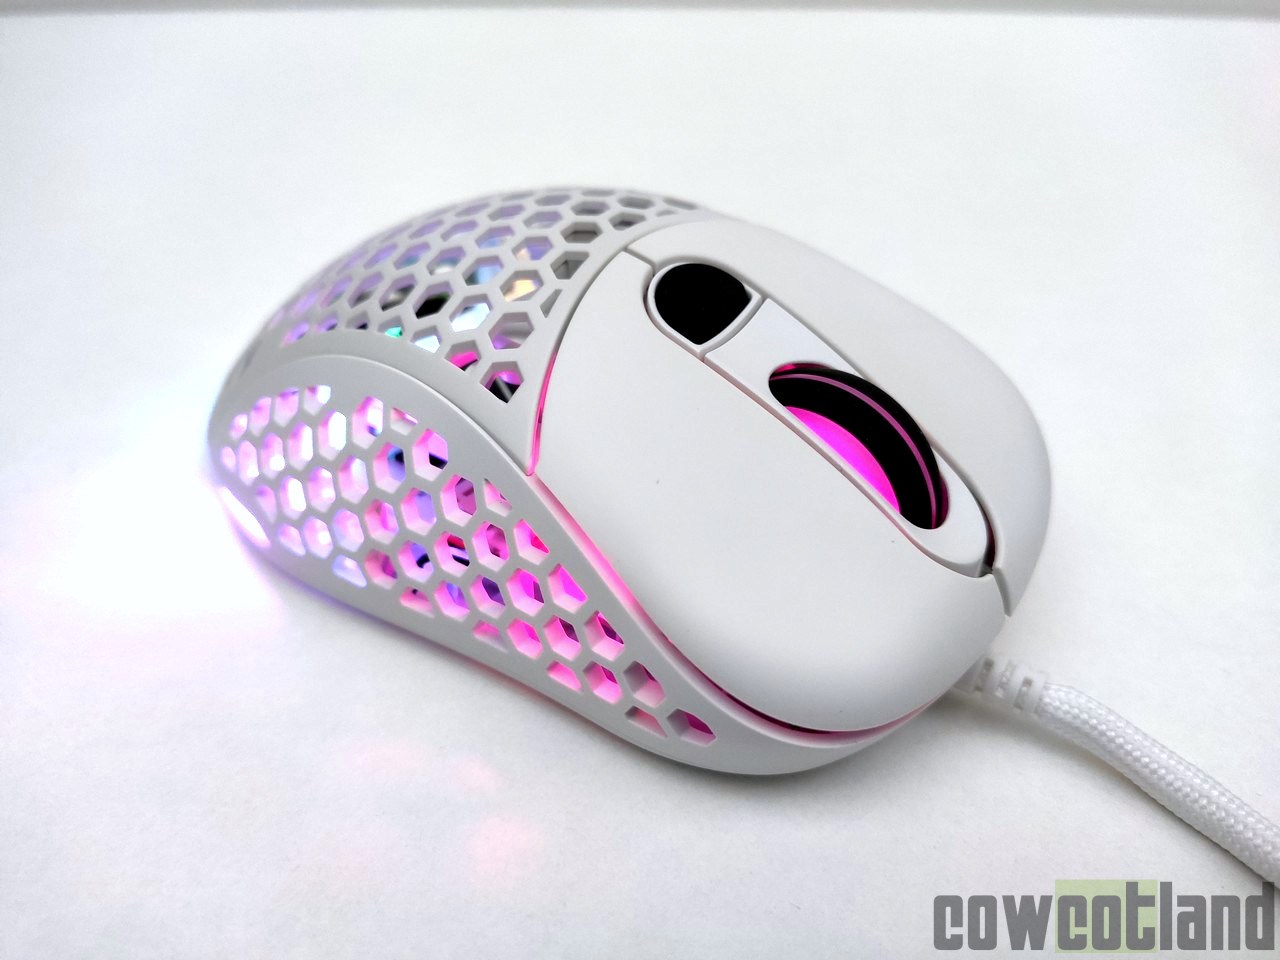 Image 43511, galerie Test souris Gaming Sharkoon Light 200 : Zowie-Killer ?